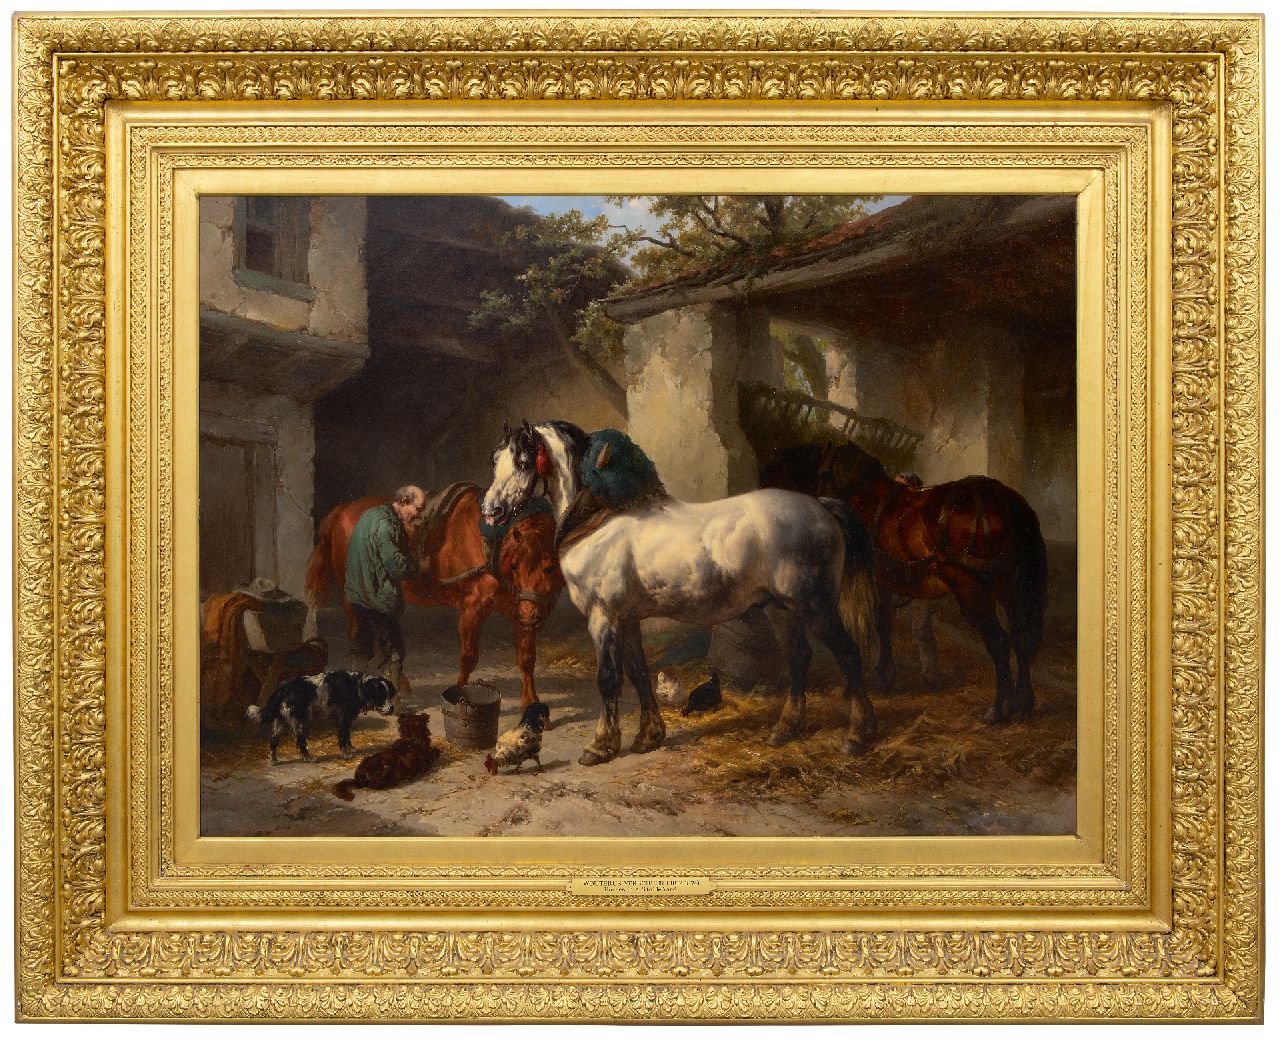 Verschuur W.  | Wouterus Verschuur | Paintings offered for sale | Horses in a stableyard, oil on canvas 76.3 x 106.2 cm, signed l.l.